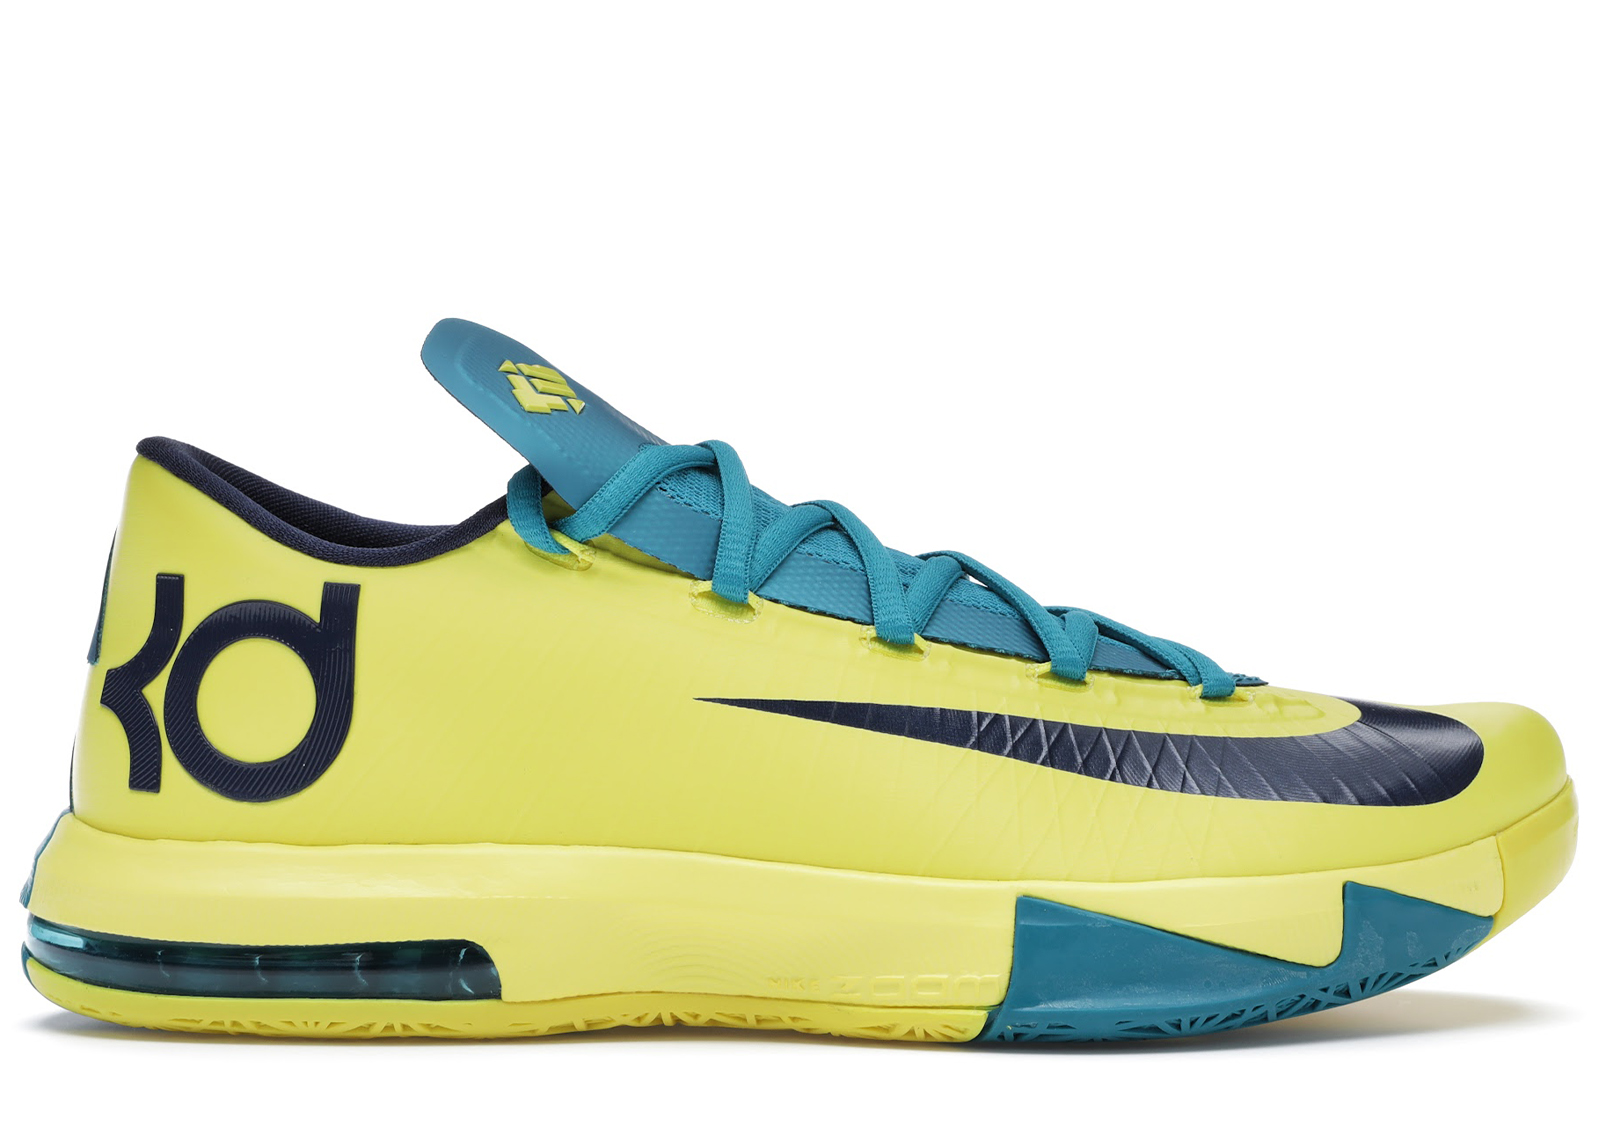 kd 6 shoes price